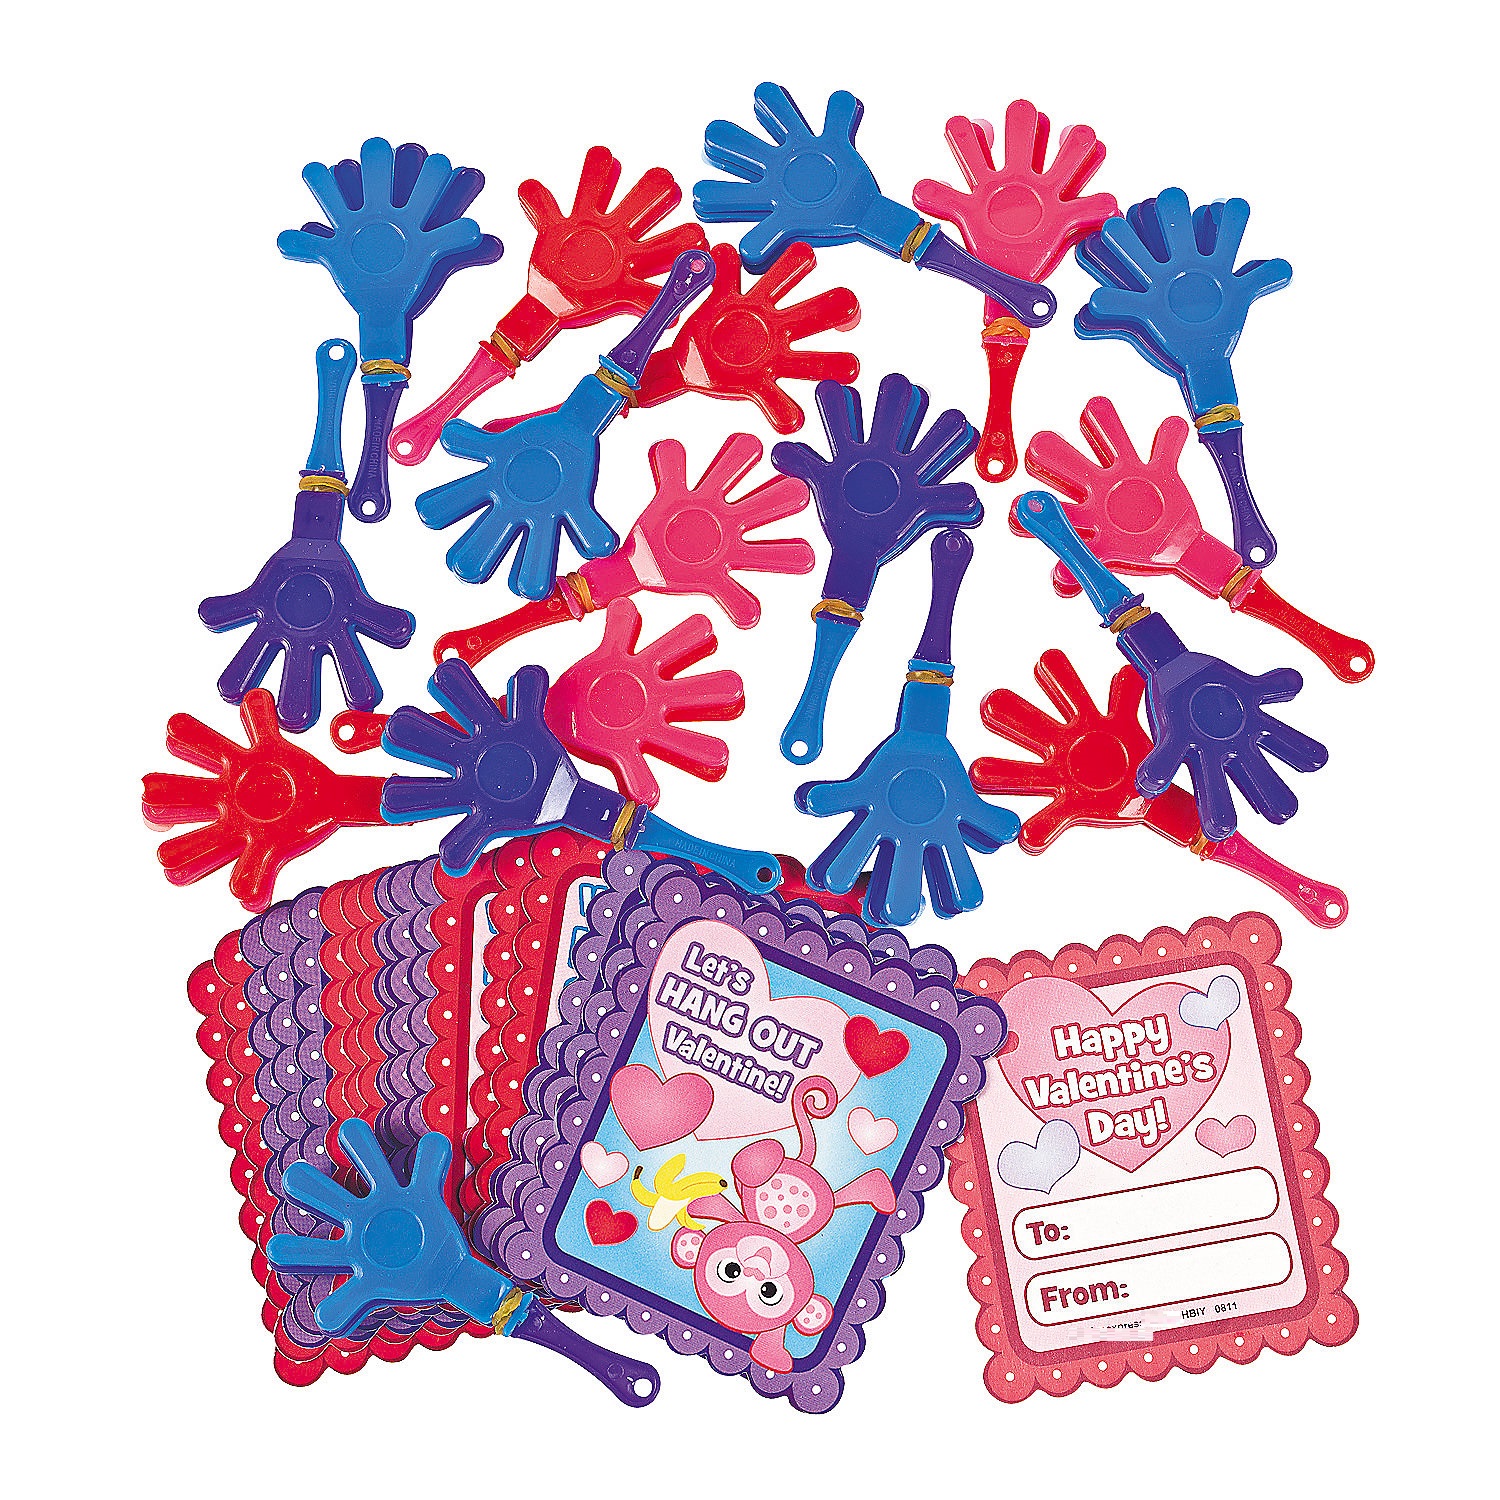 valentine-hand-clapper-fun-favors-with-cards_85_3950-a02